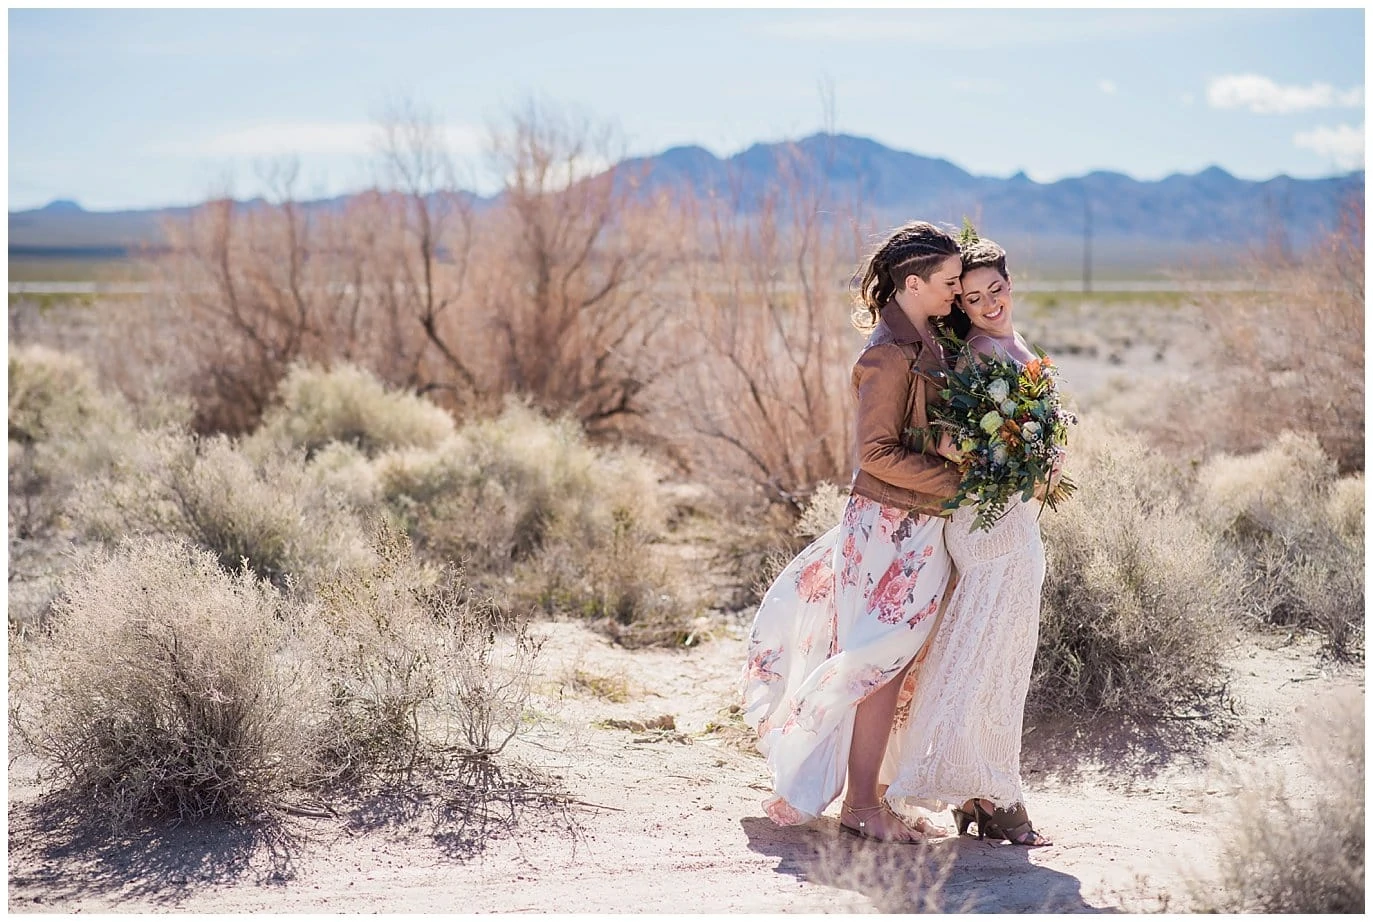 Intimate Nevada Dry Lake Bed Elopement by Las Vegas wedding photographer Jennie Crate photographer